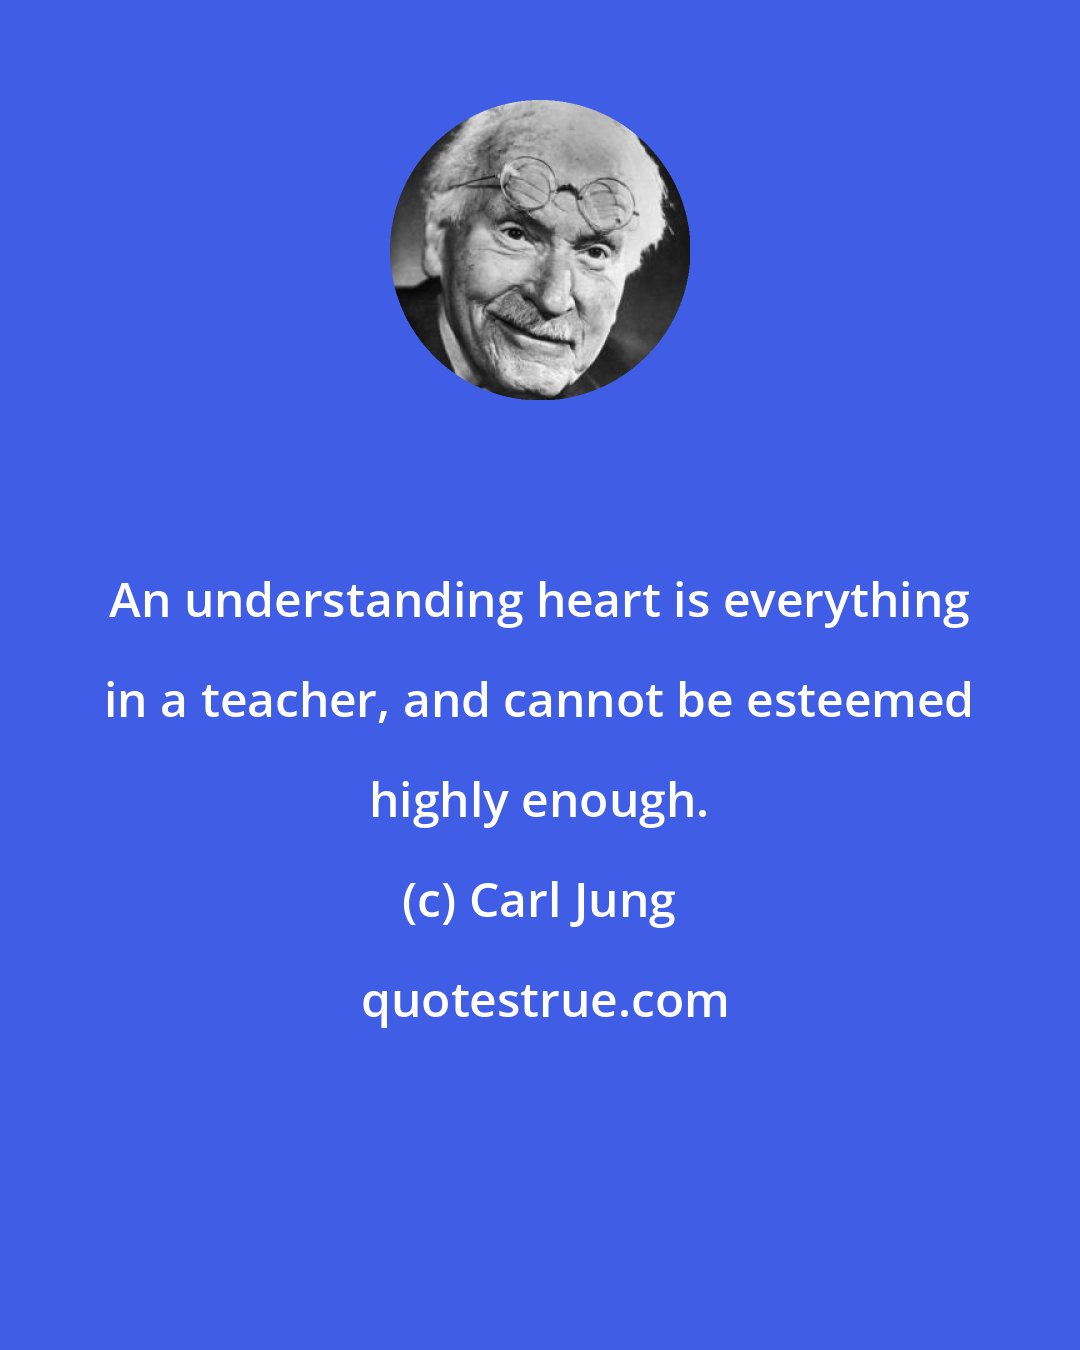 Carl Jung: An understanding heart is everything in a teacher, and cannot be esteemed highly enough.